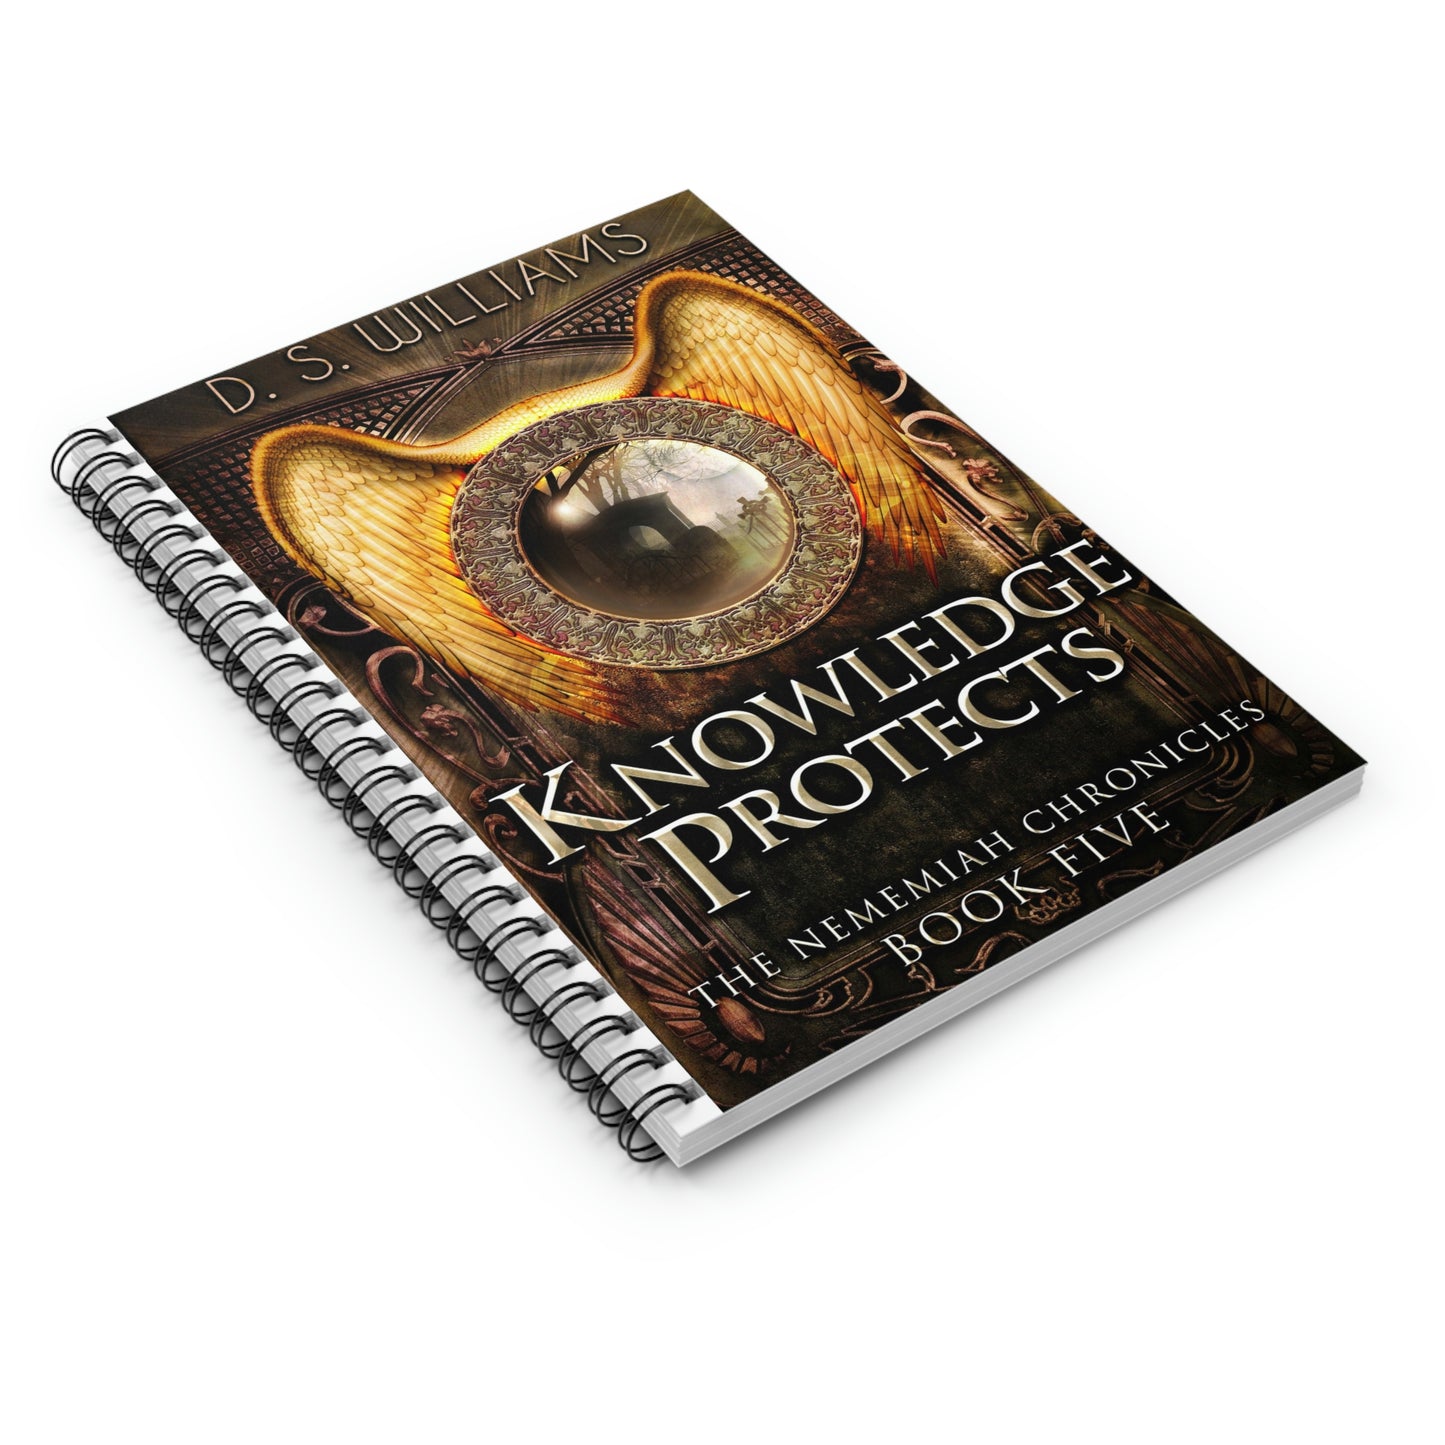 Knowledge Protects - Spiral Notebook